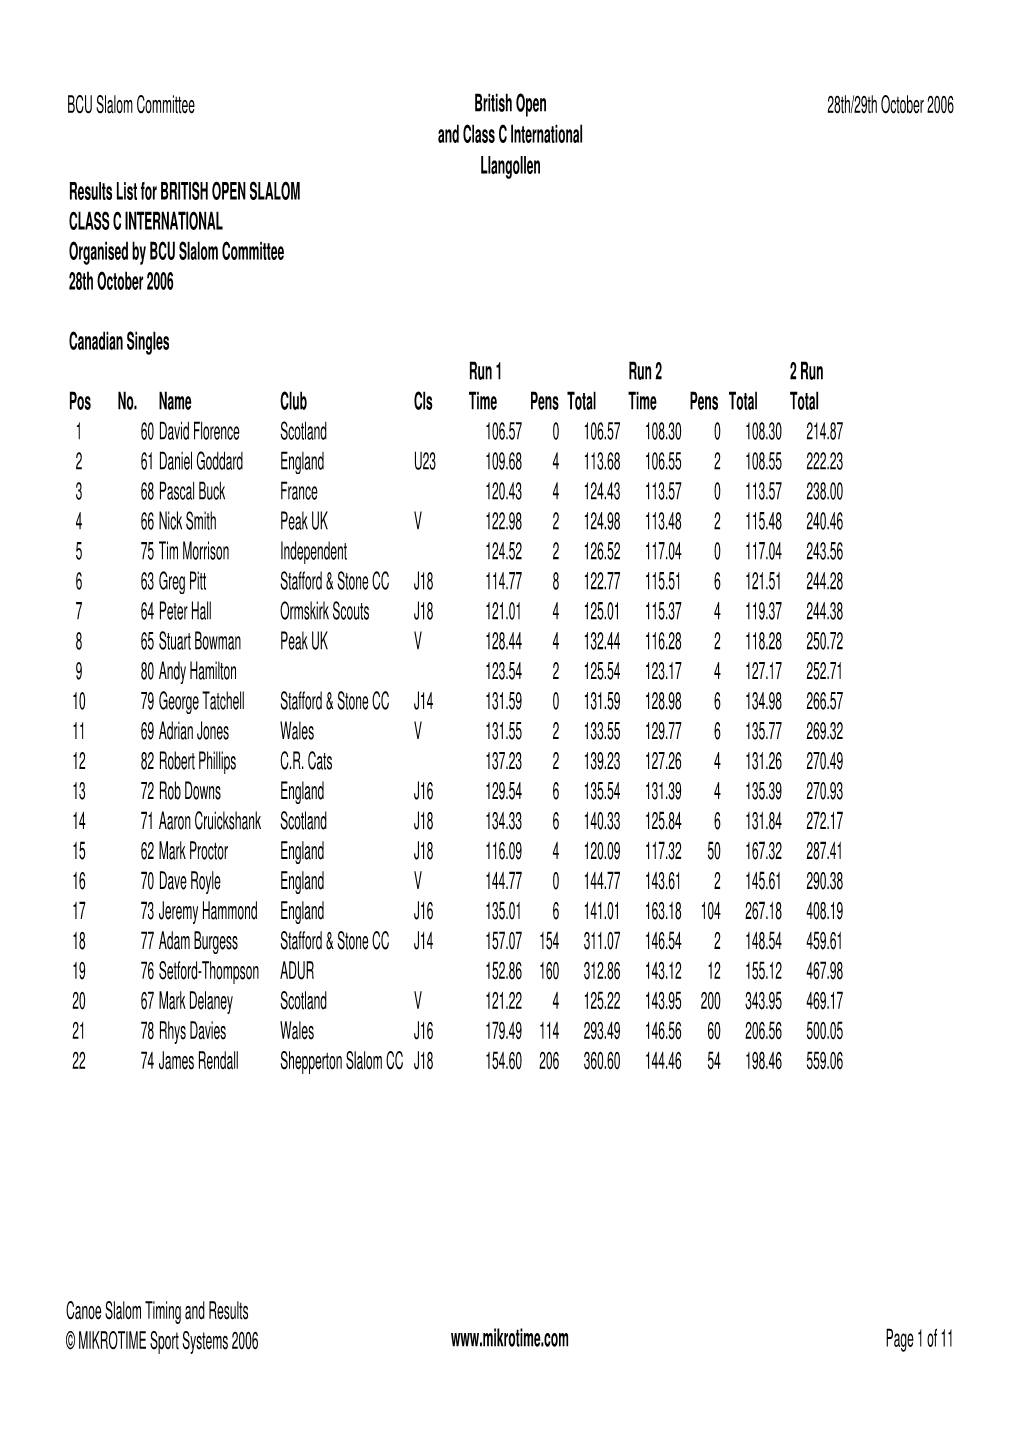 BCU Slalom Committee British Open and Class C International Llangollen 28Th/29Th October 2006 Results List for BRITISH OPEN SLAL